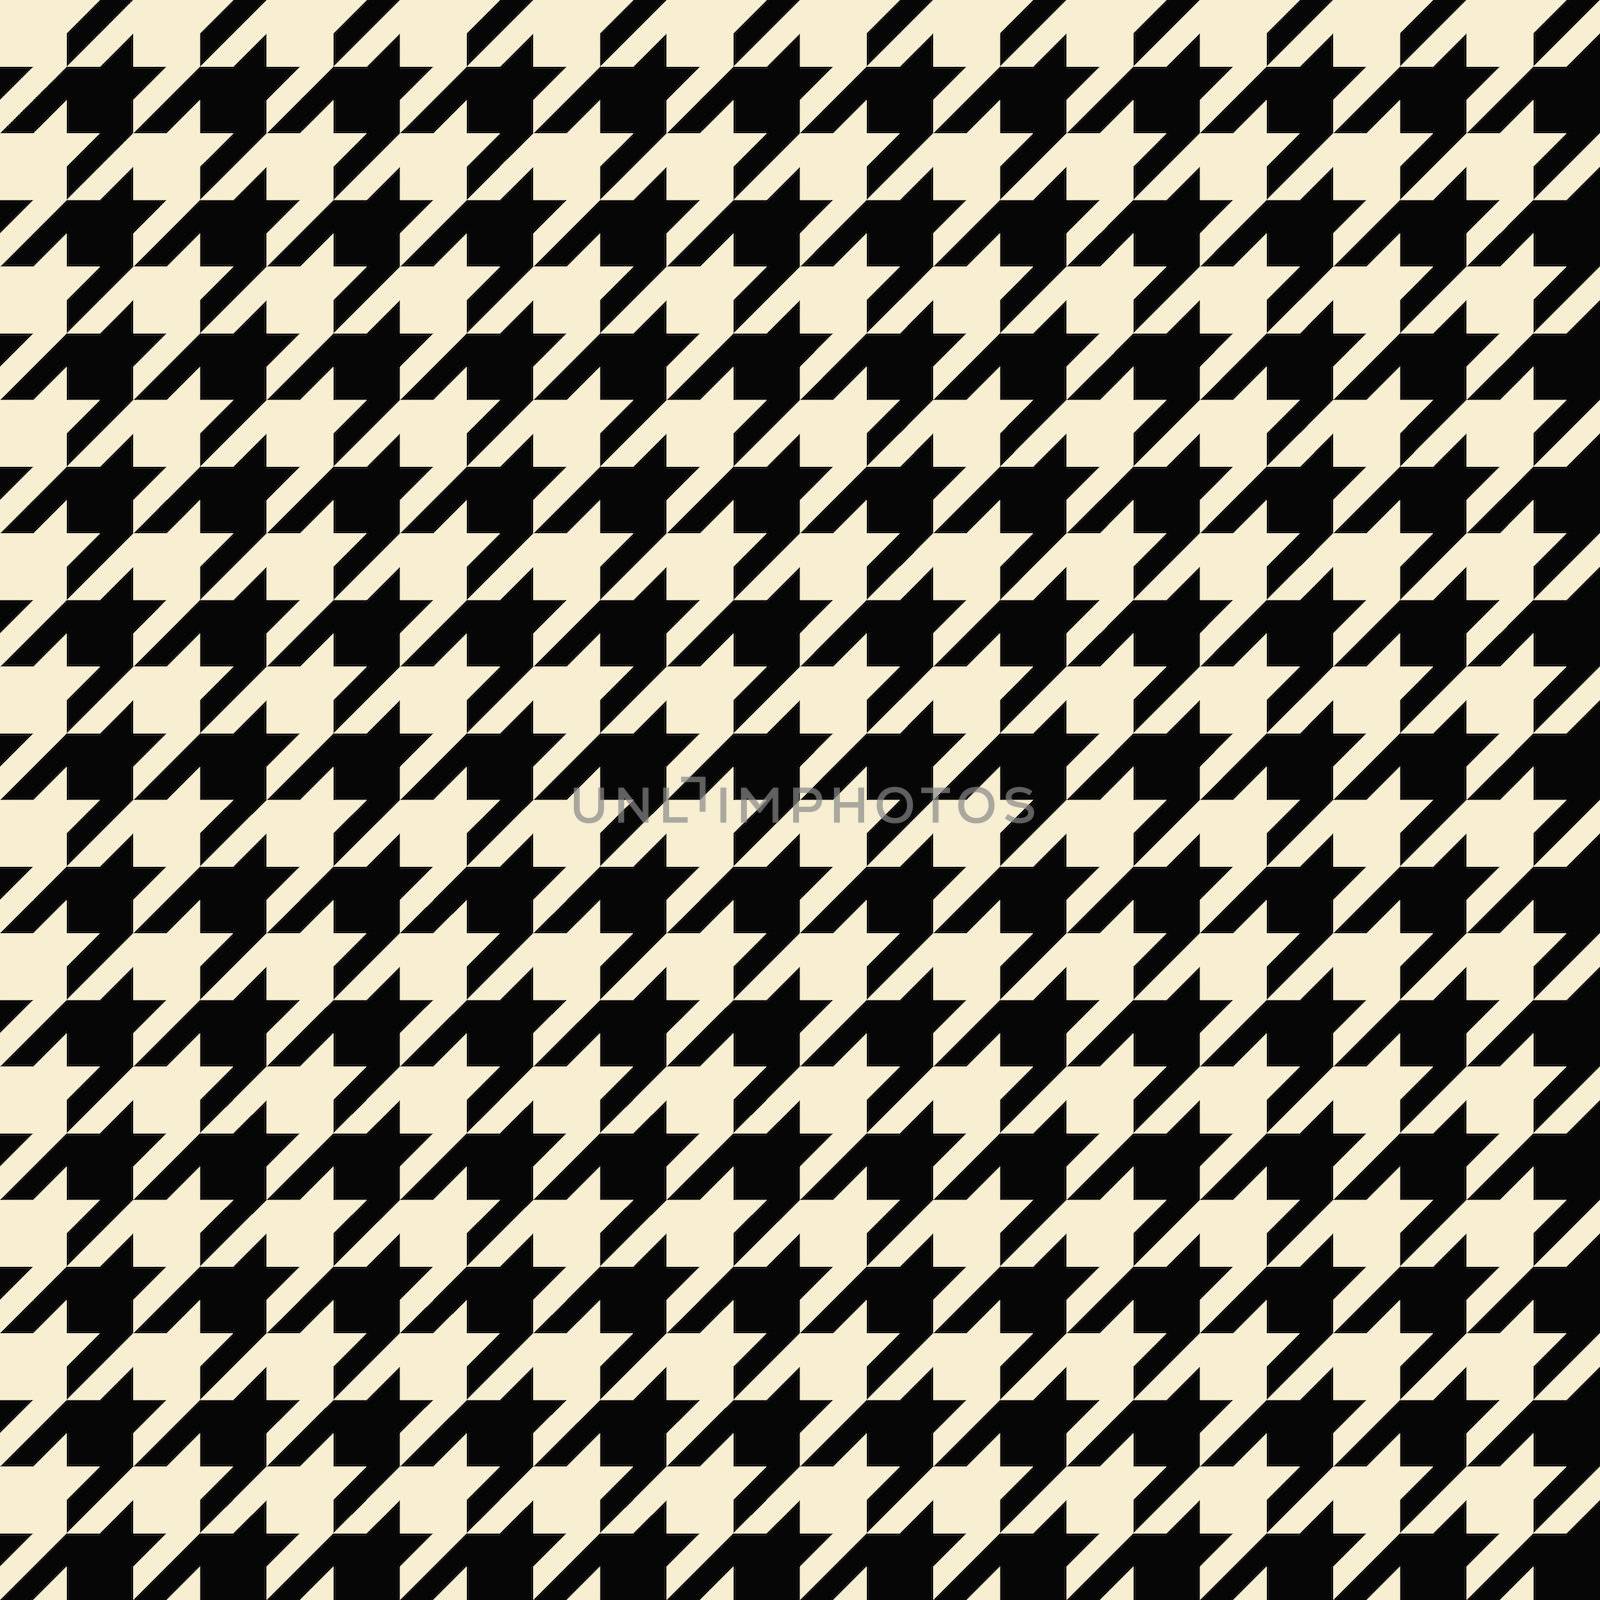 Black and tan colored seamless houndstooth pattern or texture.